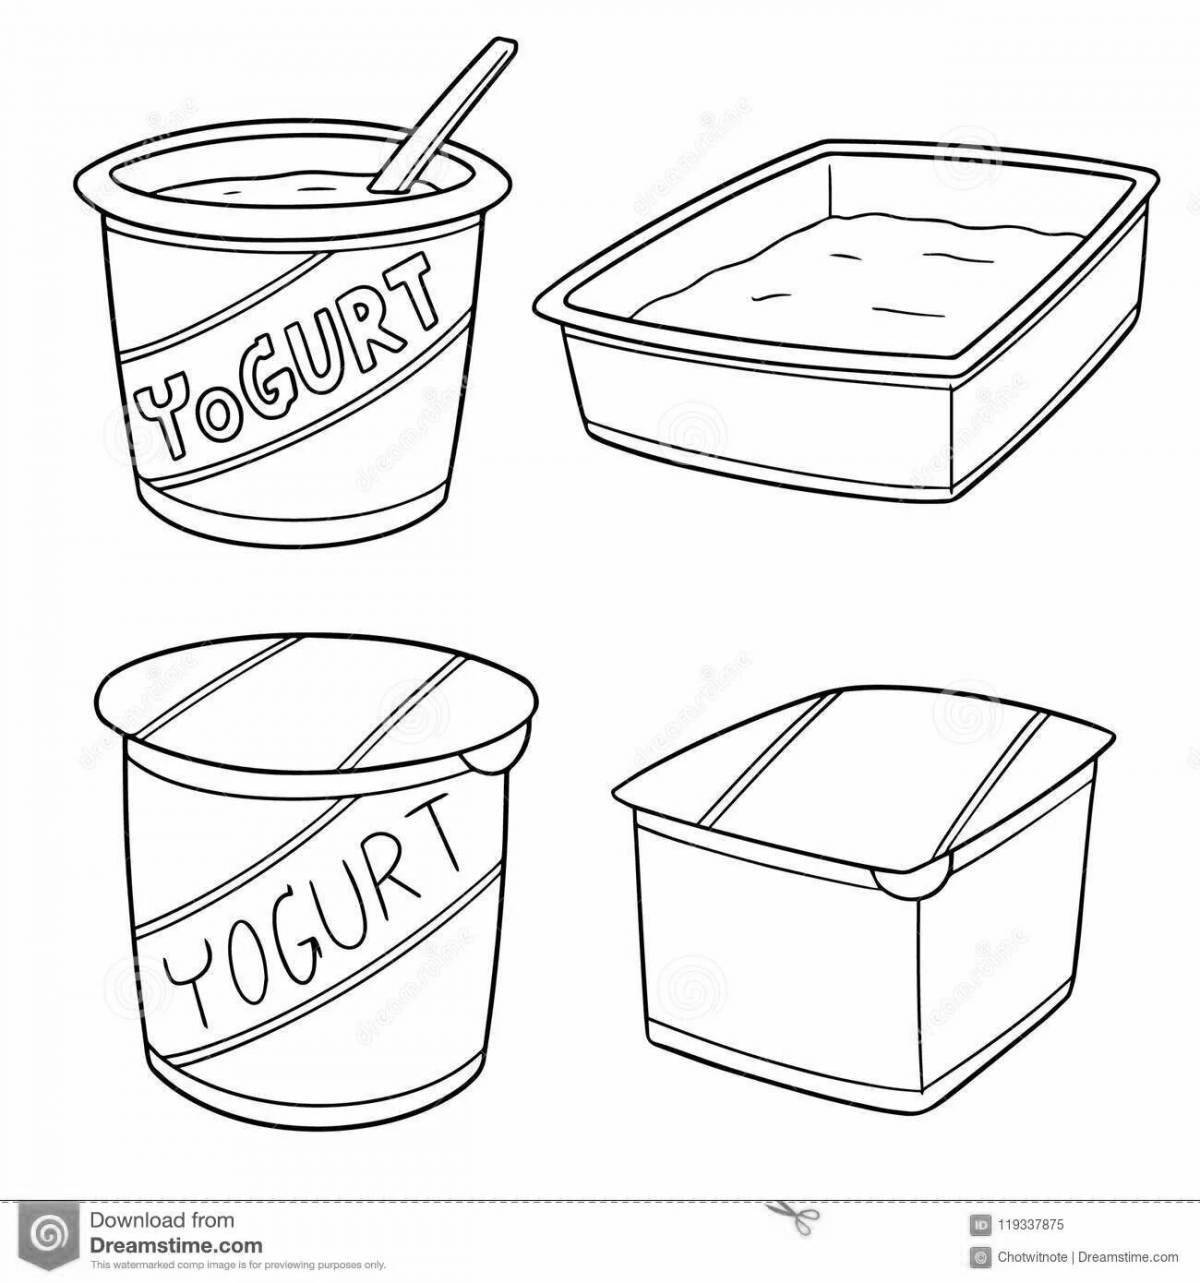 Yogurt color-explosion coloring page for kids